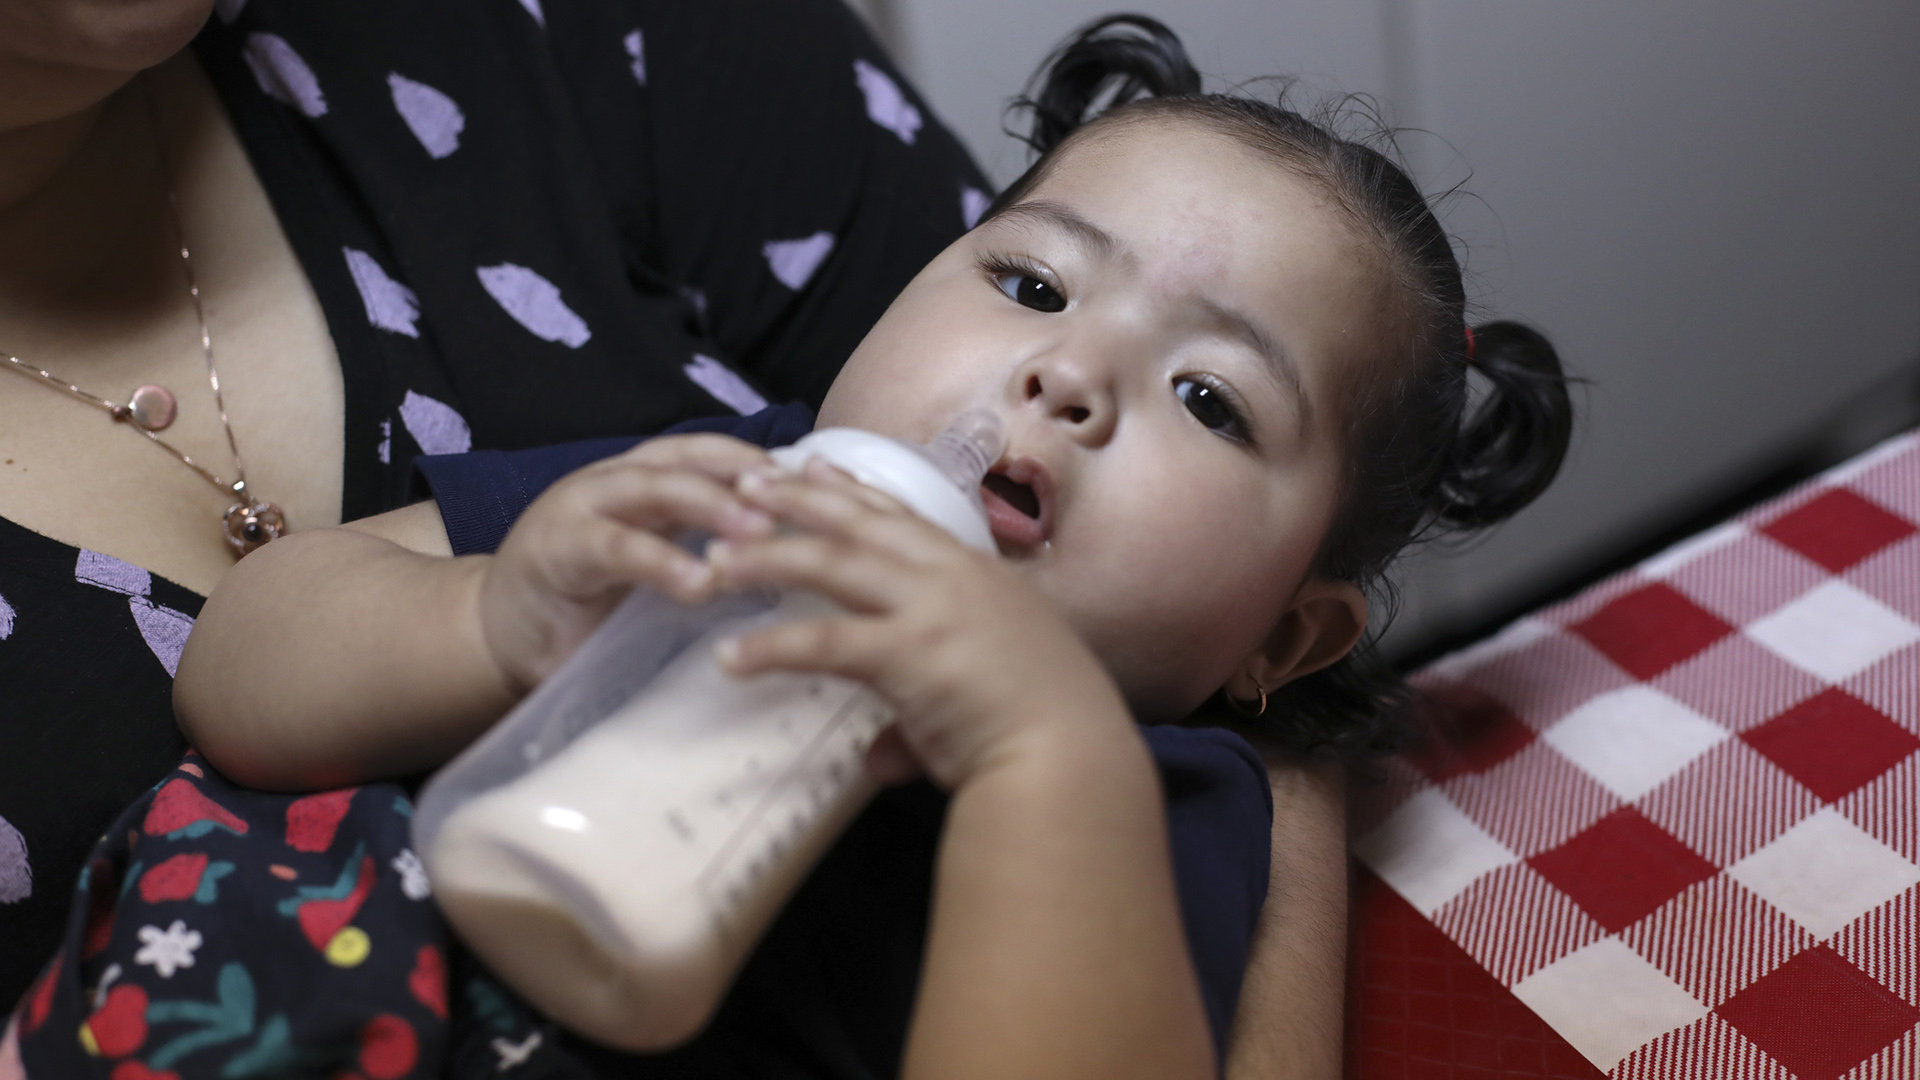 Adaliz Angeles holds a bottle to her mouth while being held at the edge of a table.